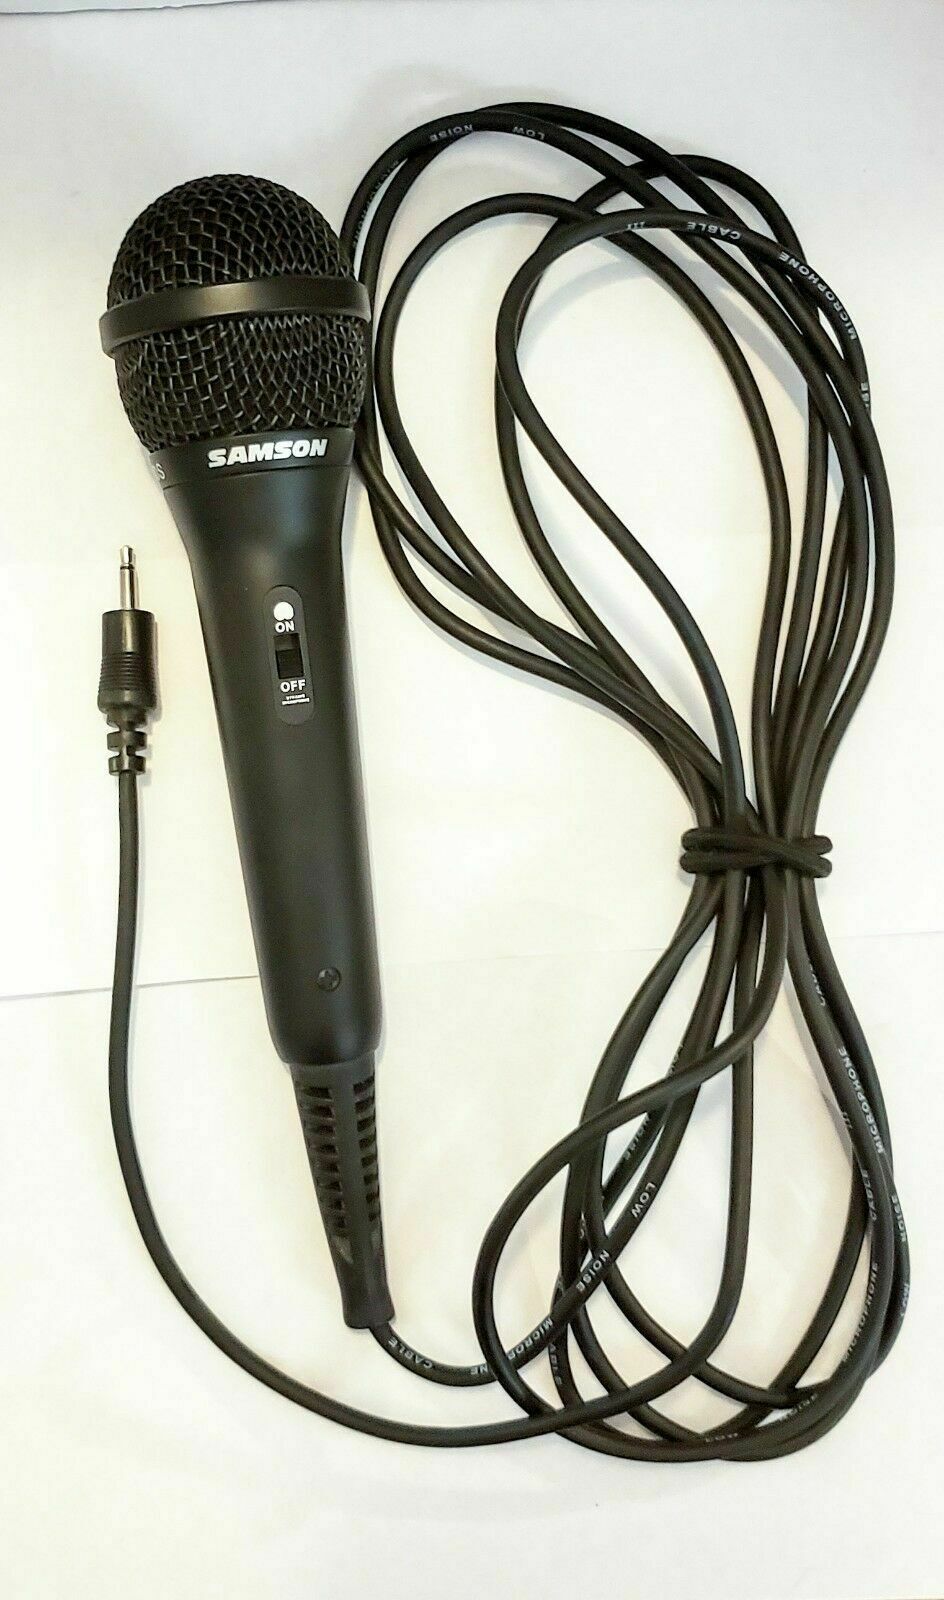 Samson R10S Dynamic Multimedia Karaoke Vocal Microphone with On/Off Switch - $15.00